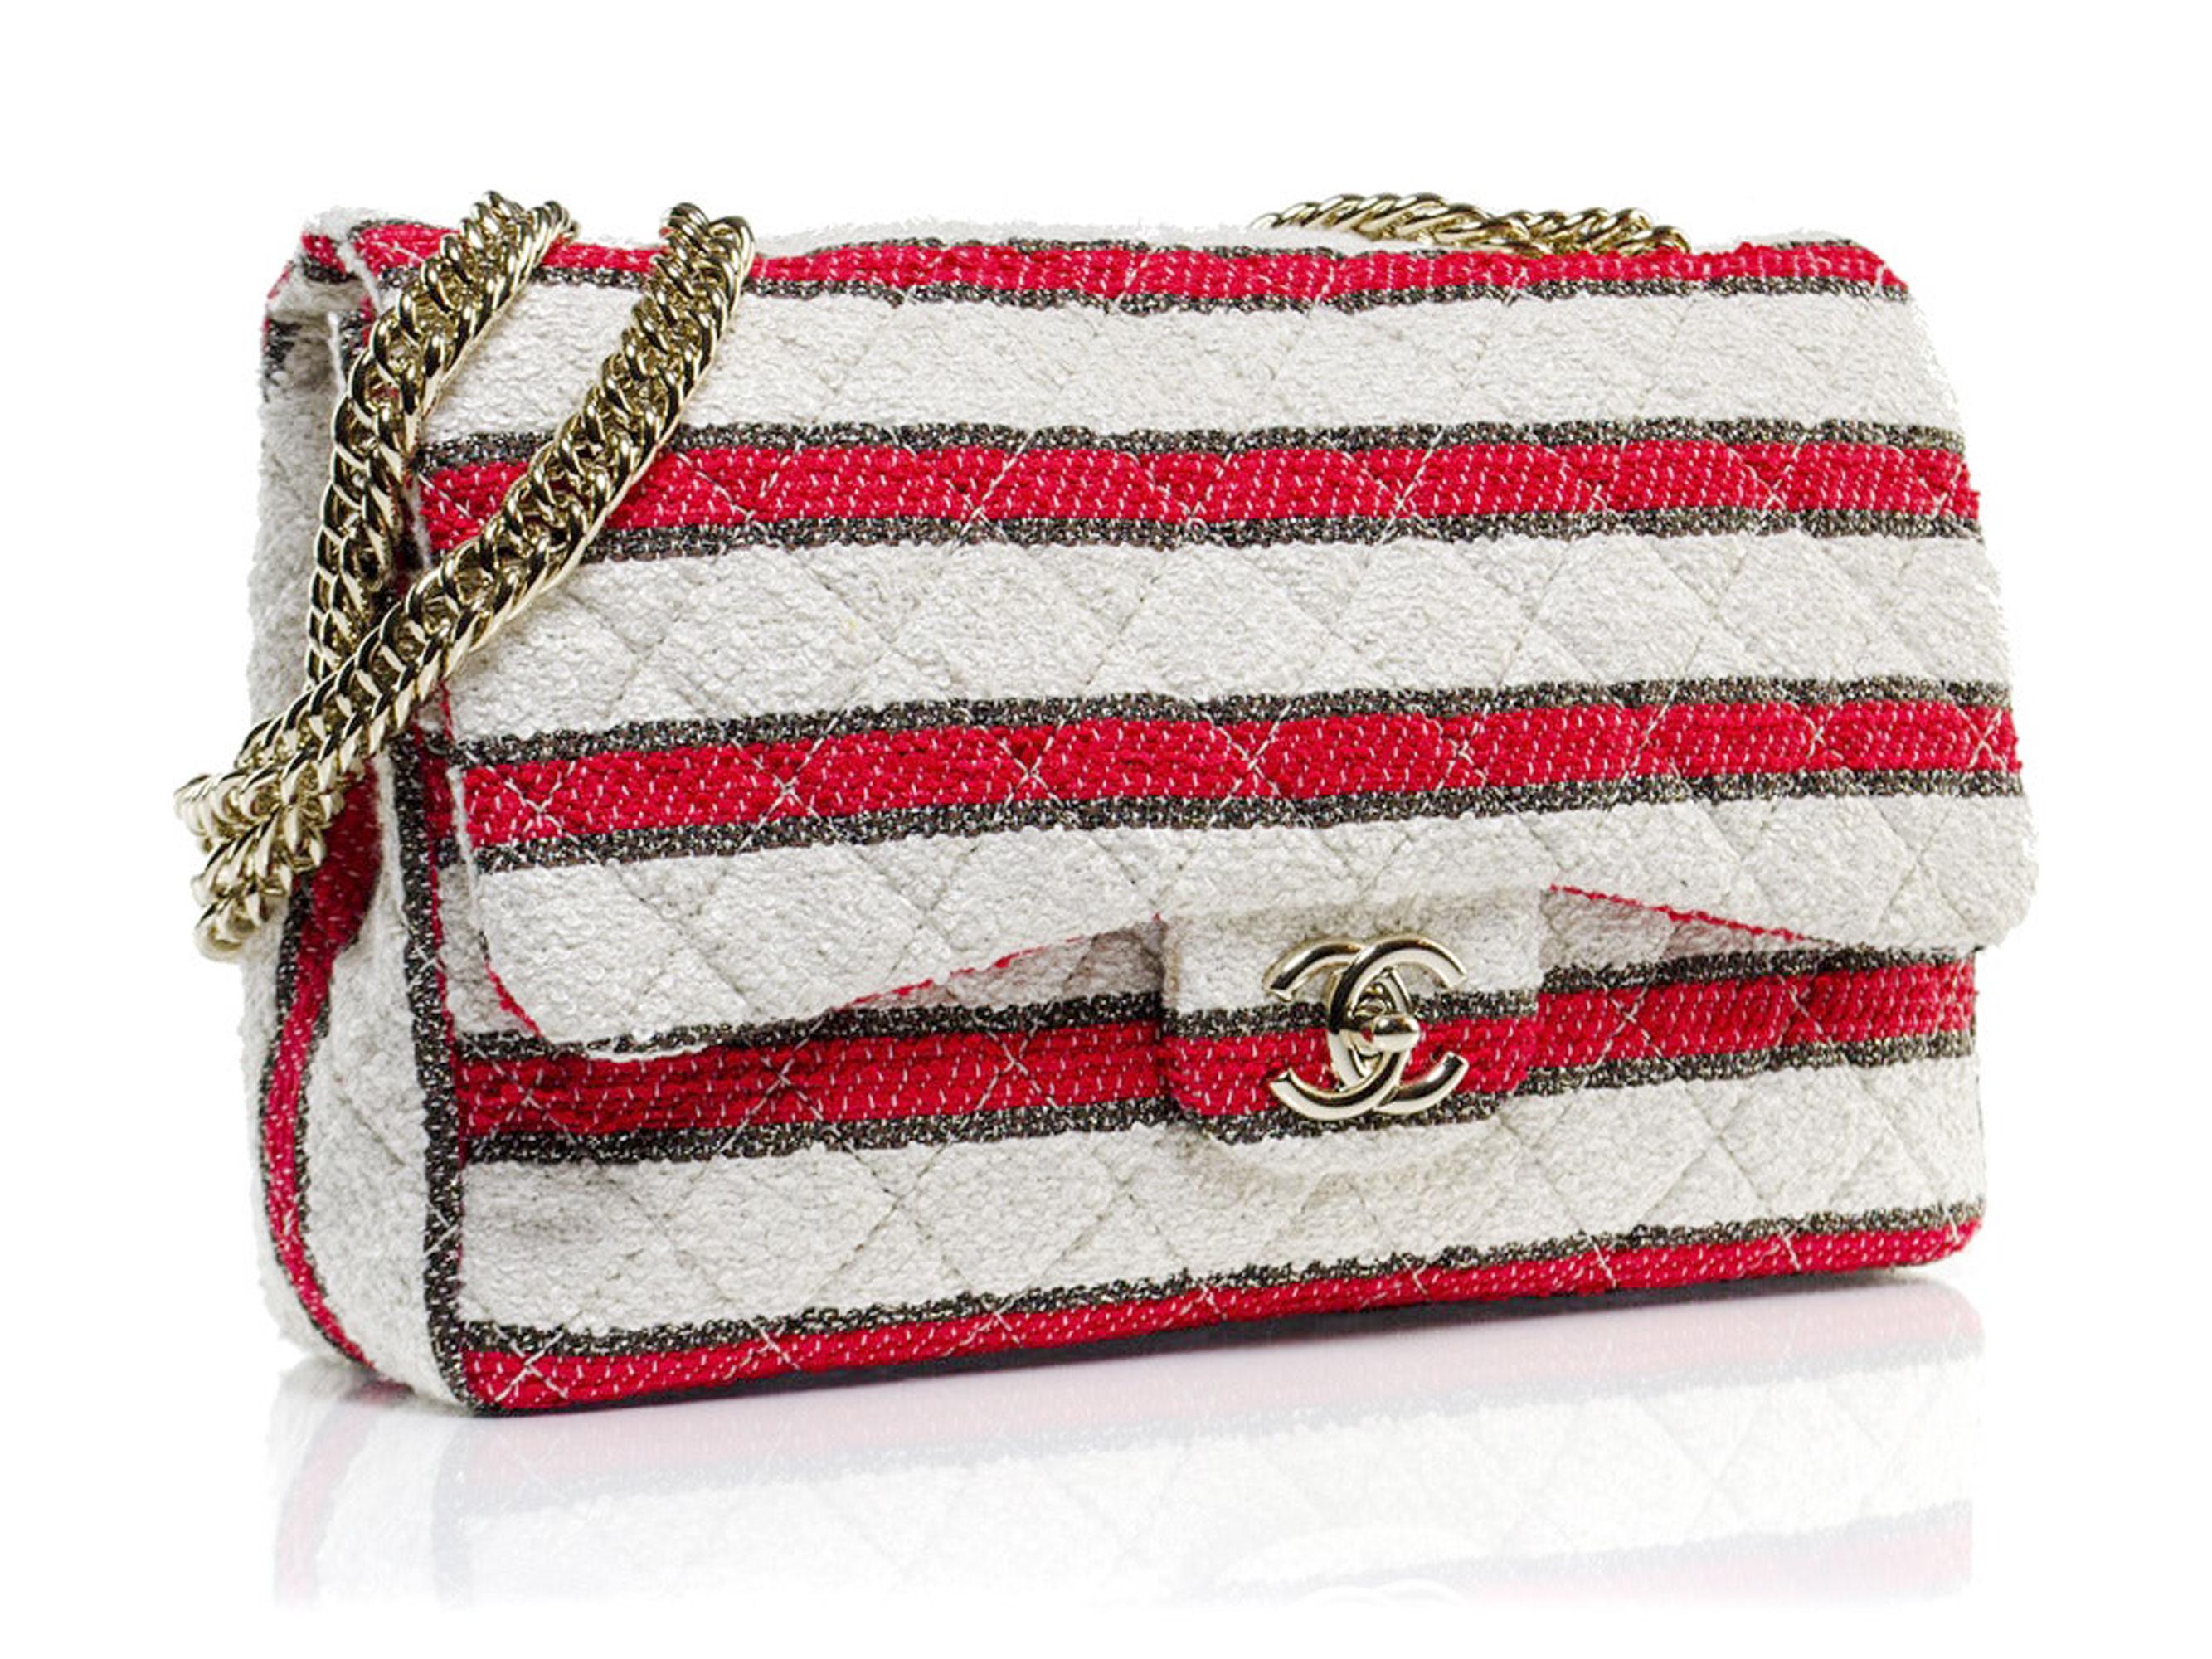 Chanel Rare 2009 Medium Classic Flap Bag Red White Stripe Tweed Shoulder Bag  In Good Condition For Sale In Miami, FL